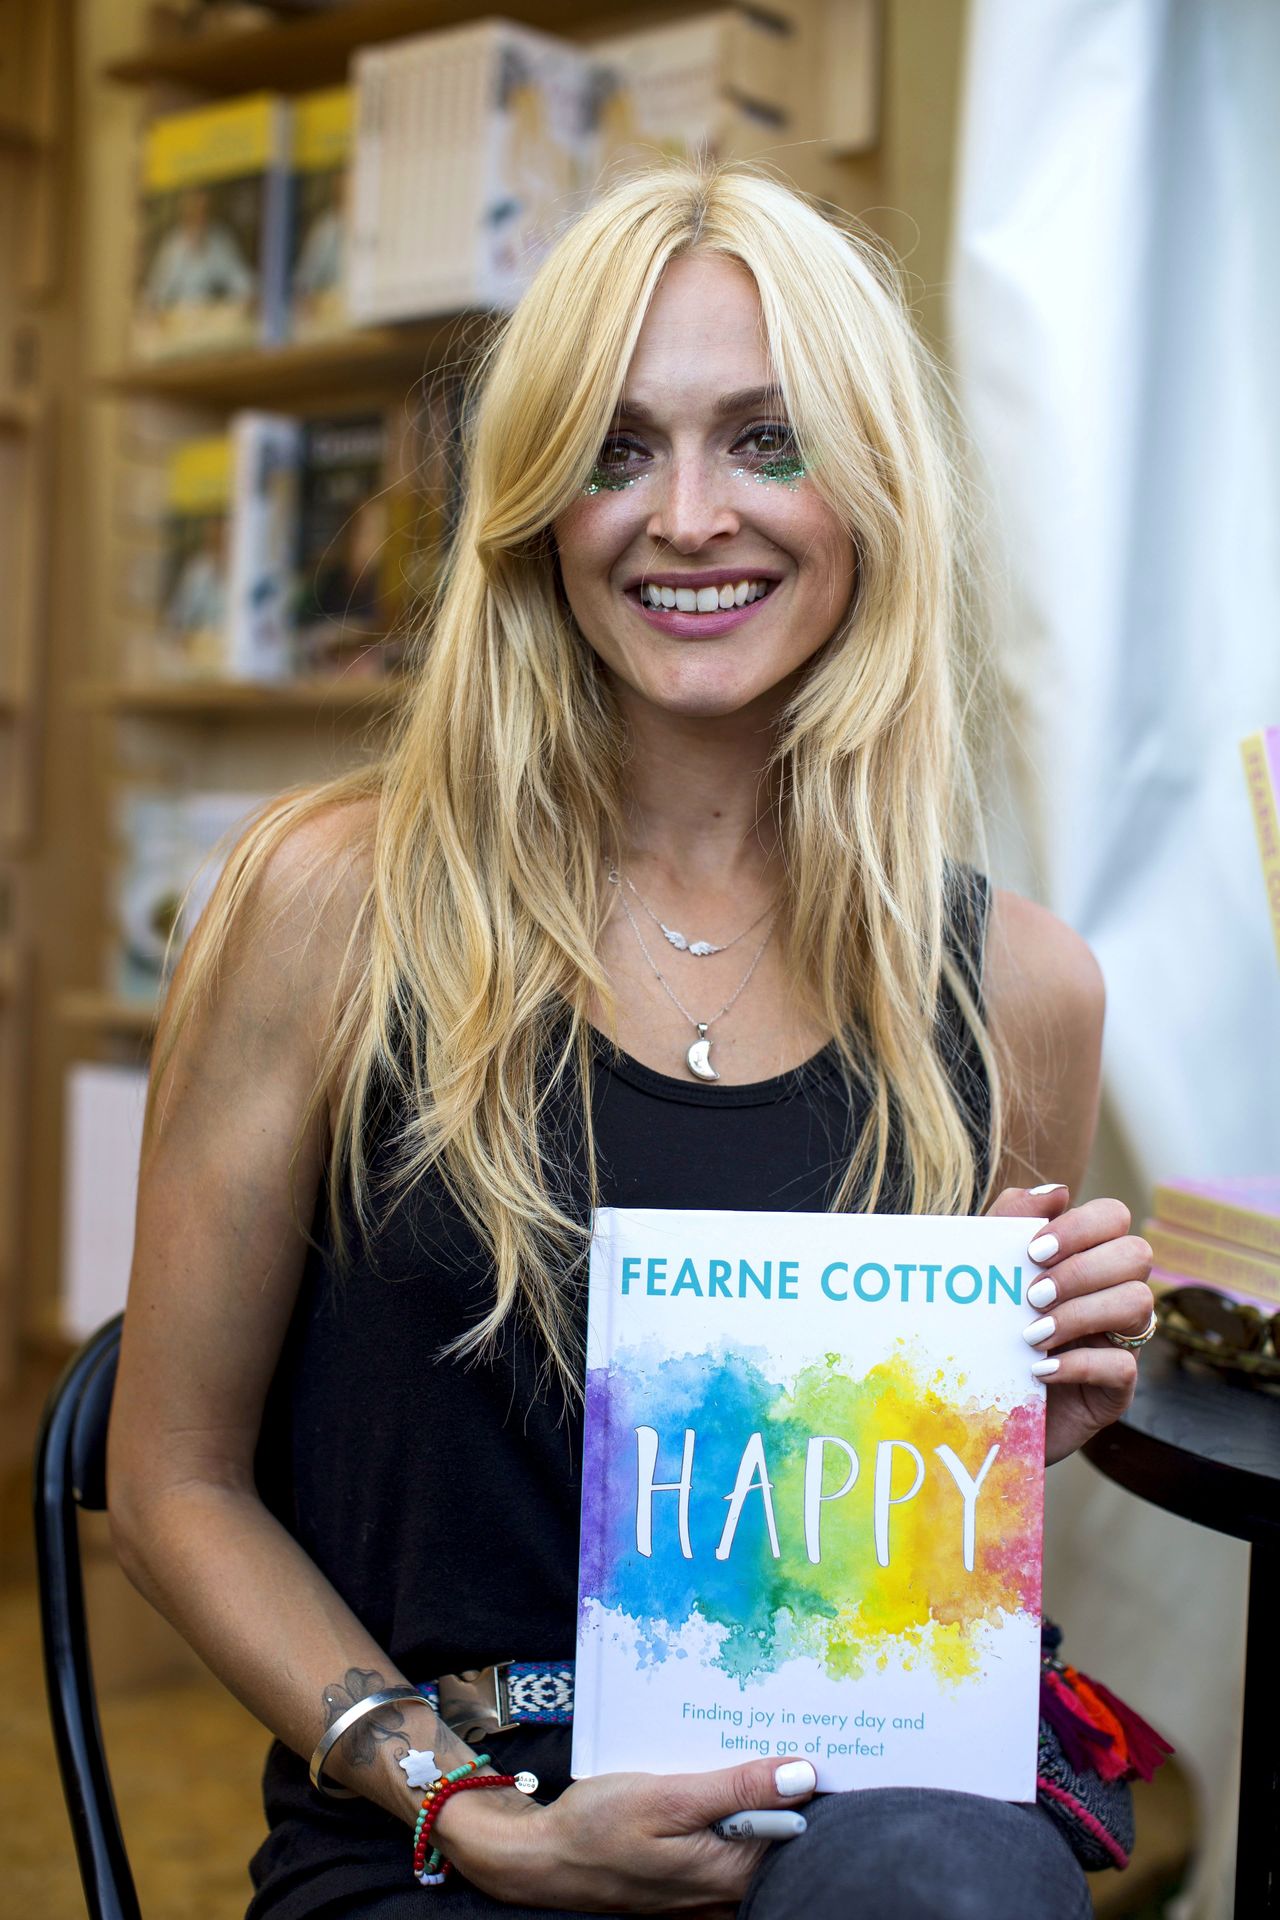 Fearne is the author of 'Happy', which she has expanded into a podcast